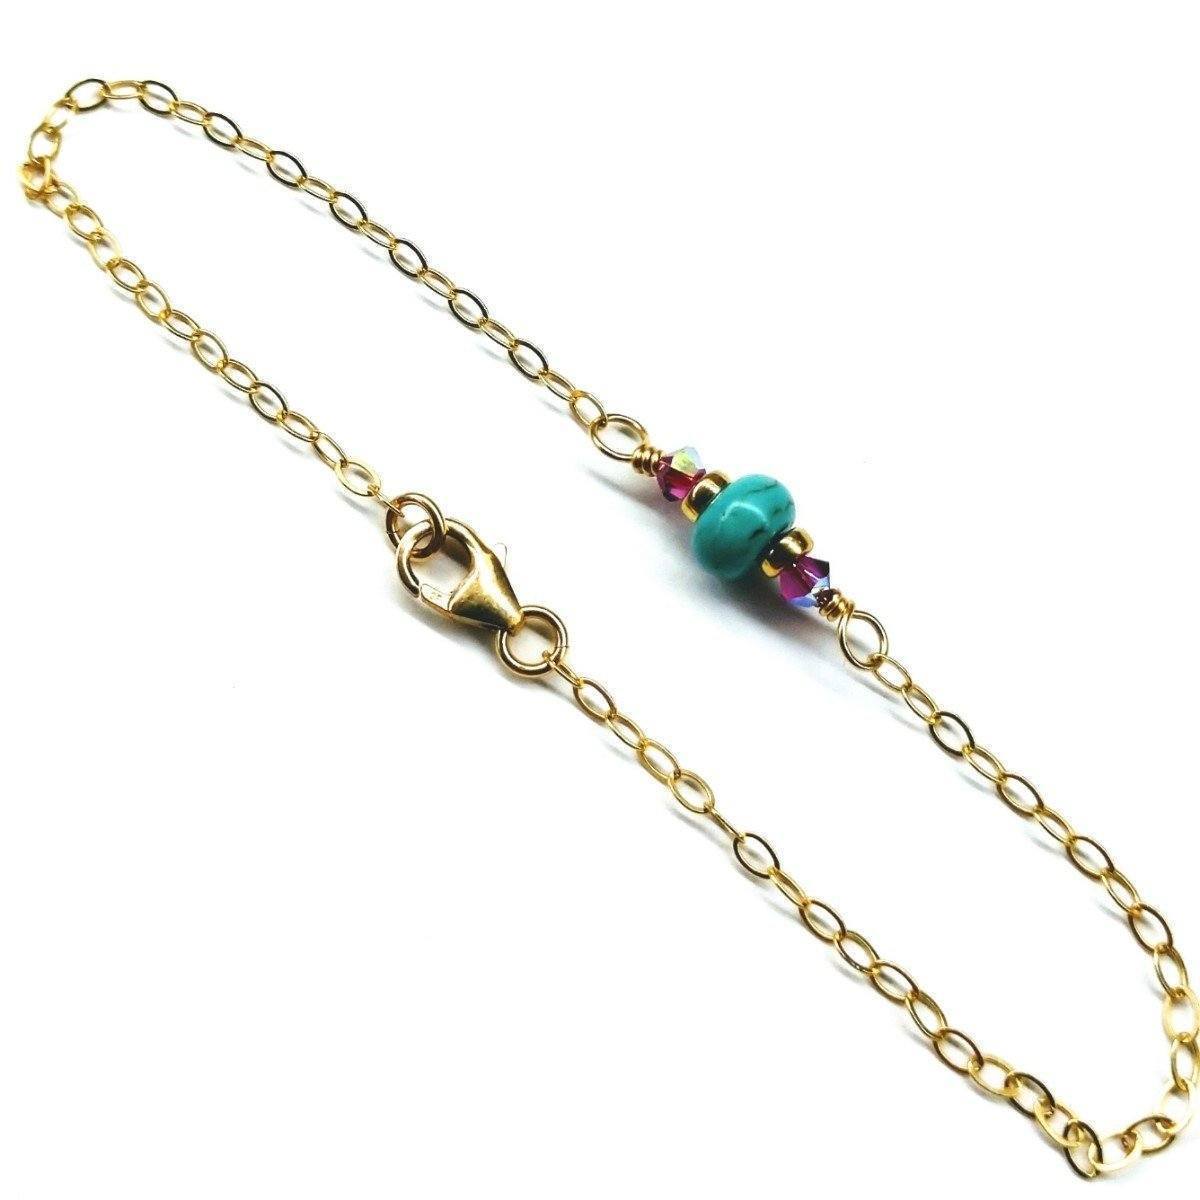 Handcrafted 14K Gold Filled Turquoise and Fuchsia Bracelet with Sparkly Chain - Sleek Design for All Occasions - Bracelets - Bijou Her -  -  - 